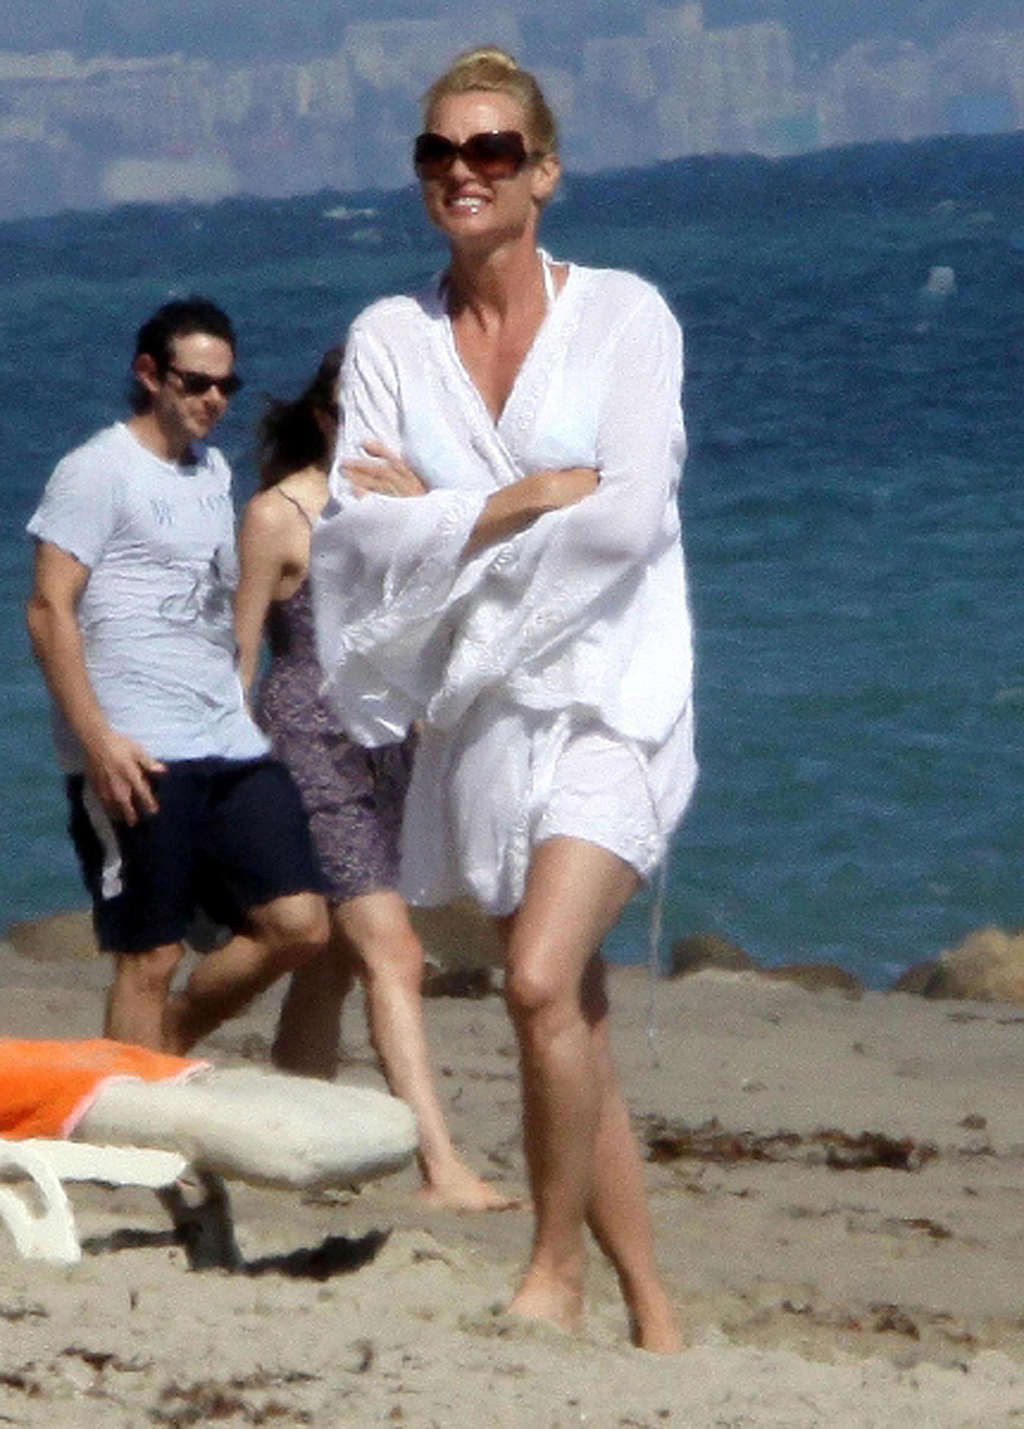 Nicollette Sheridan showing her nice and sexy ass on beach #75374638